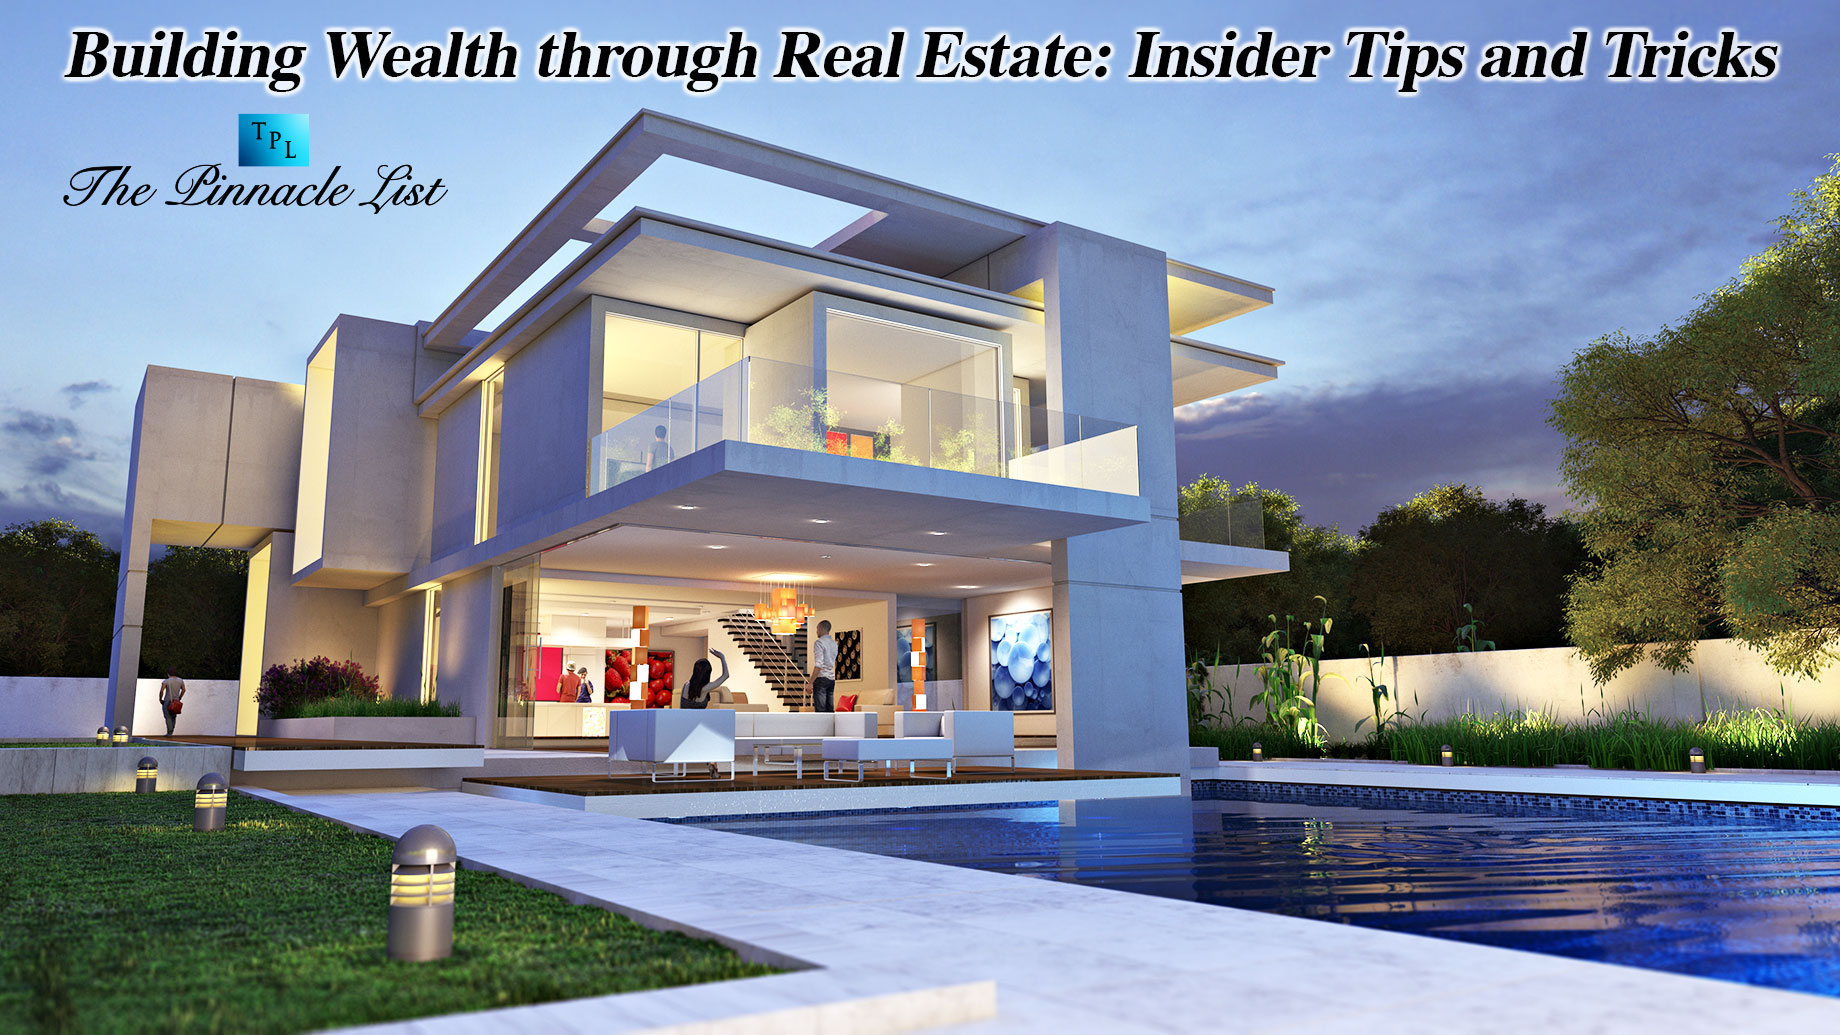 Building Wealth through Real Estate: Insider Tips and Tricks